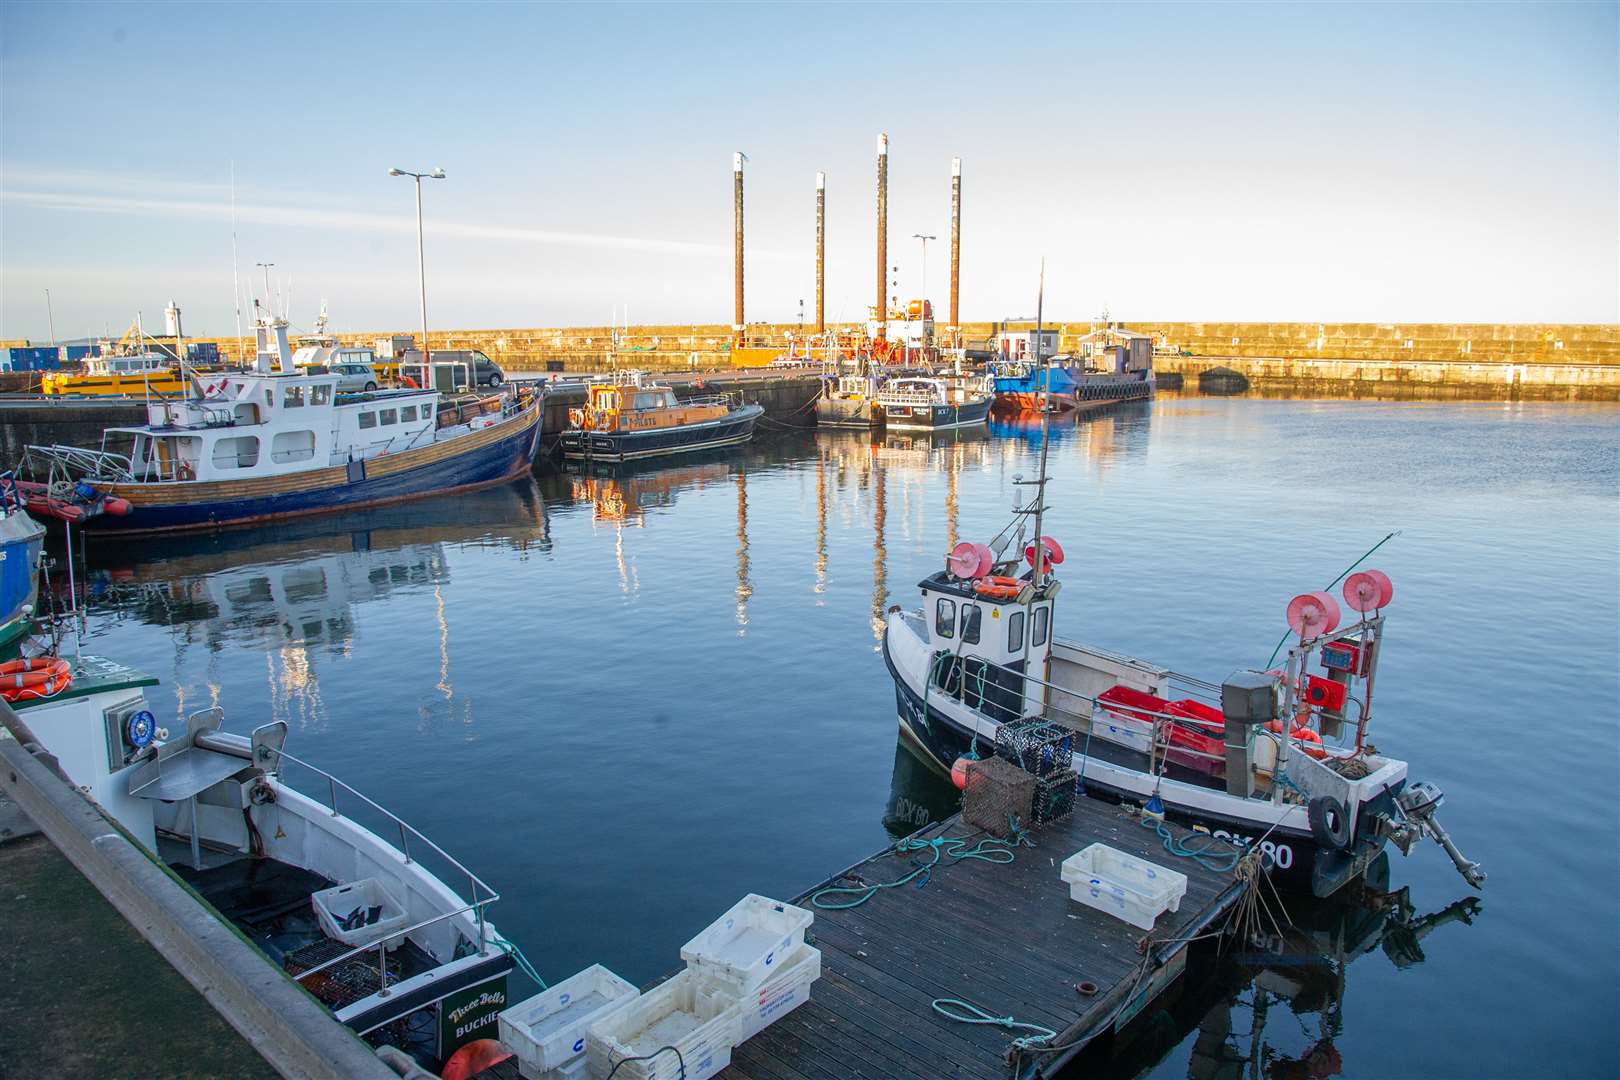 A slight rise in fish landings at Buckie Harbour was recorded. Picture: Daniel Forsyth